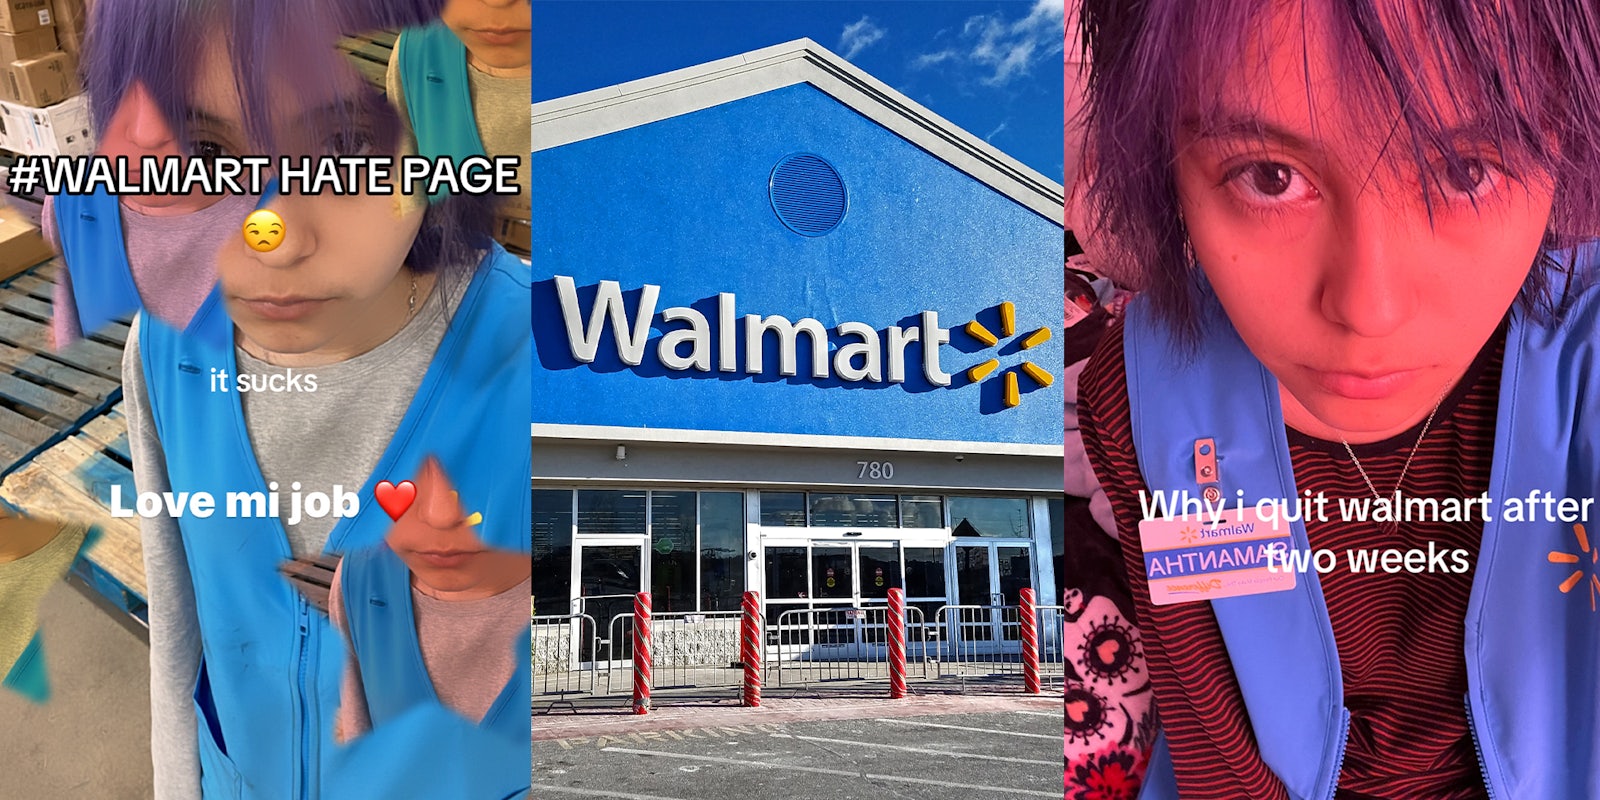 Walmart worker shares why they quit after 2 weeks on the job